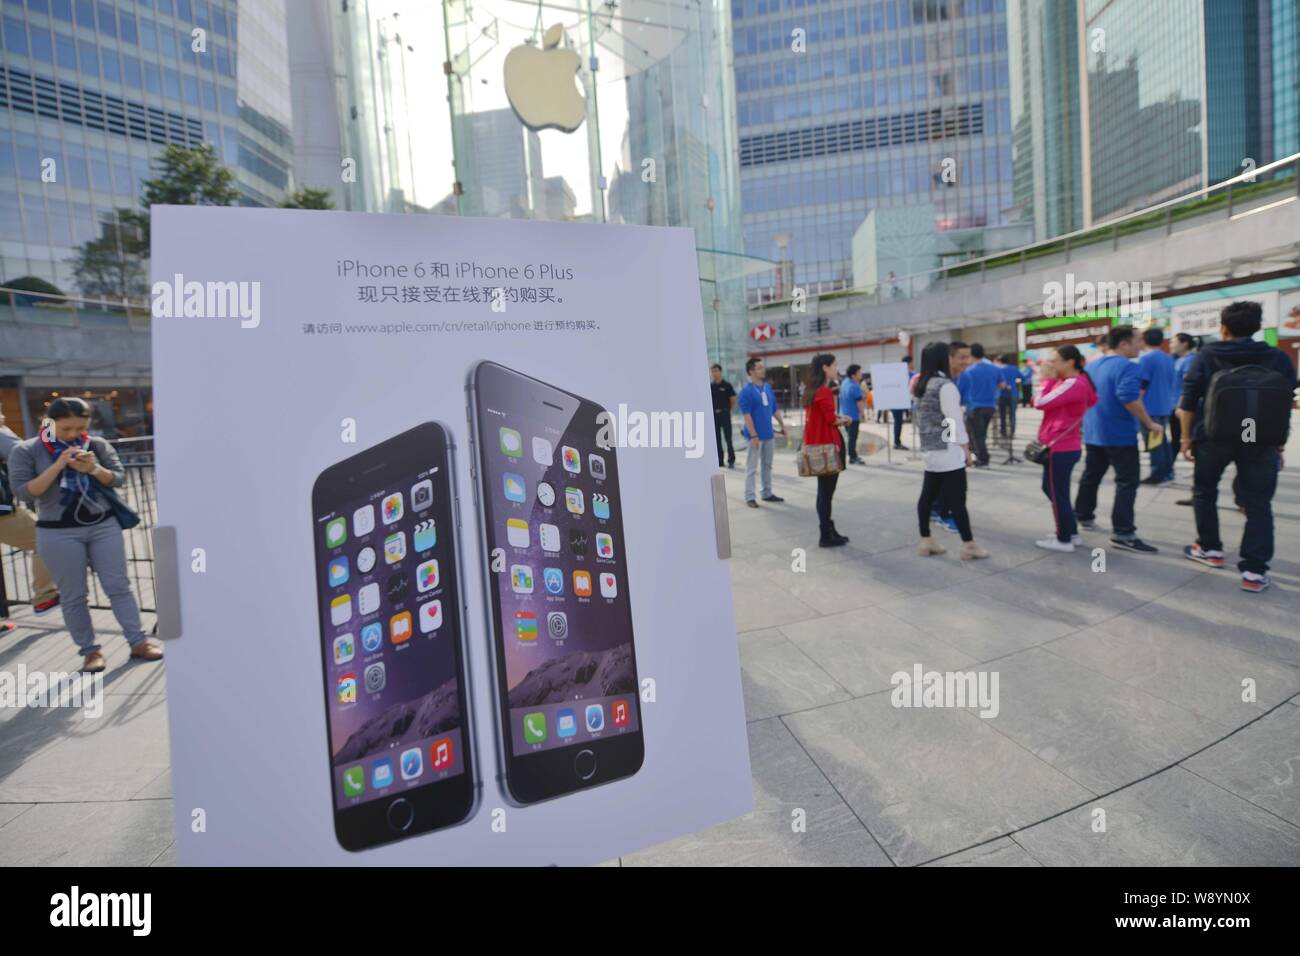 An advertisement for iPhone 6 and iPhone 6 Plus smartphones is seen outside the Apple Store in the Lujiazui Financial District in Pudong, Shanghai, Ch Stock Photo